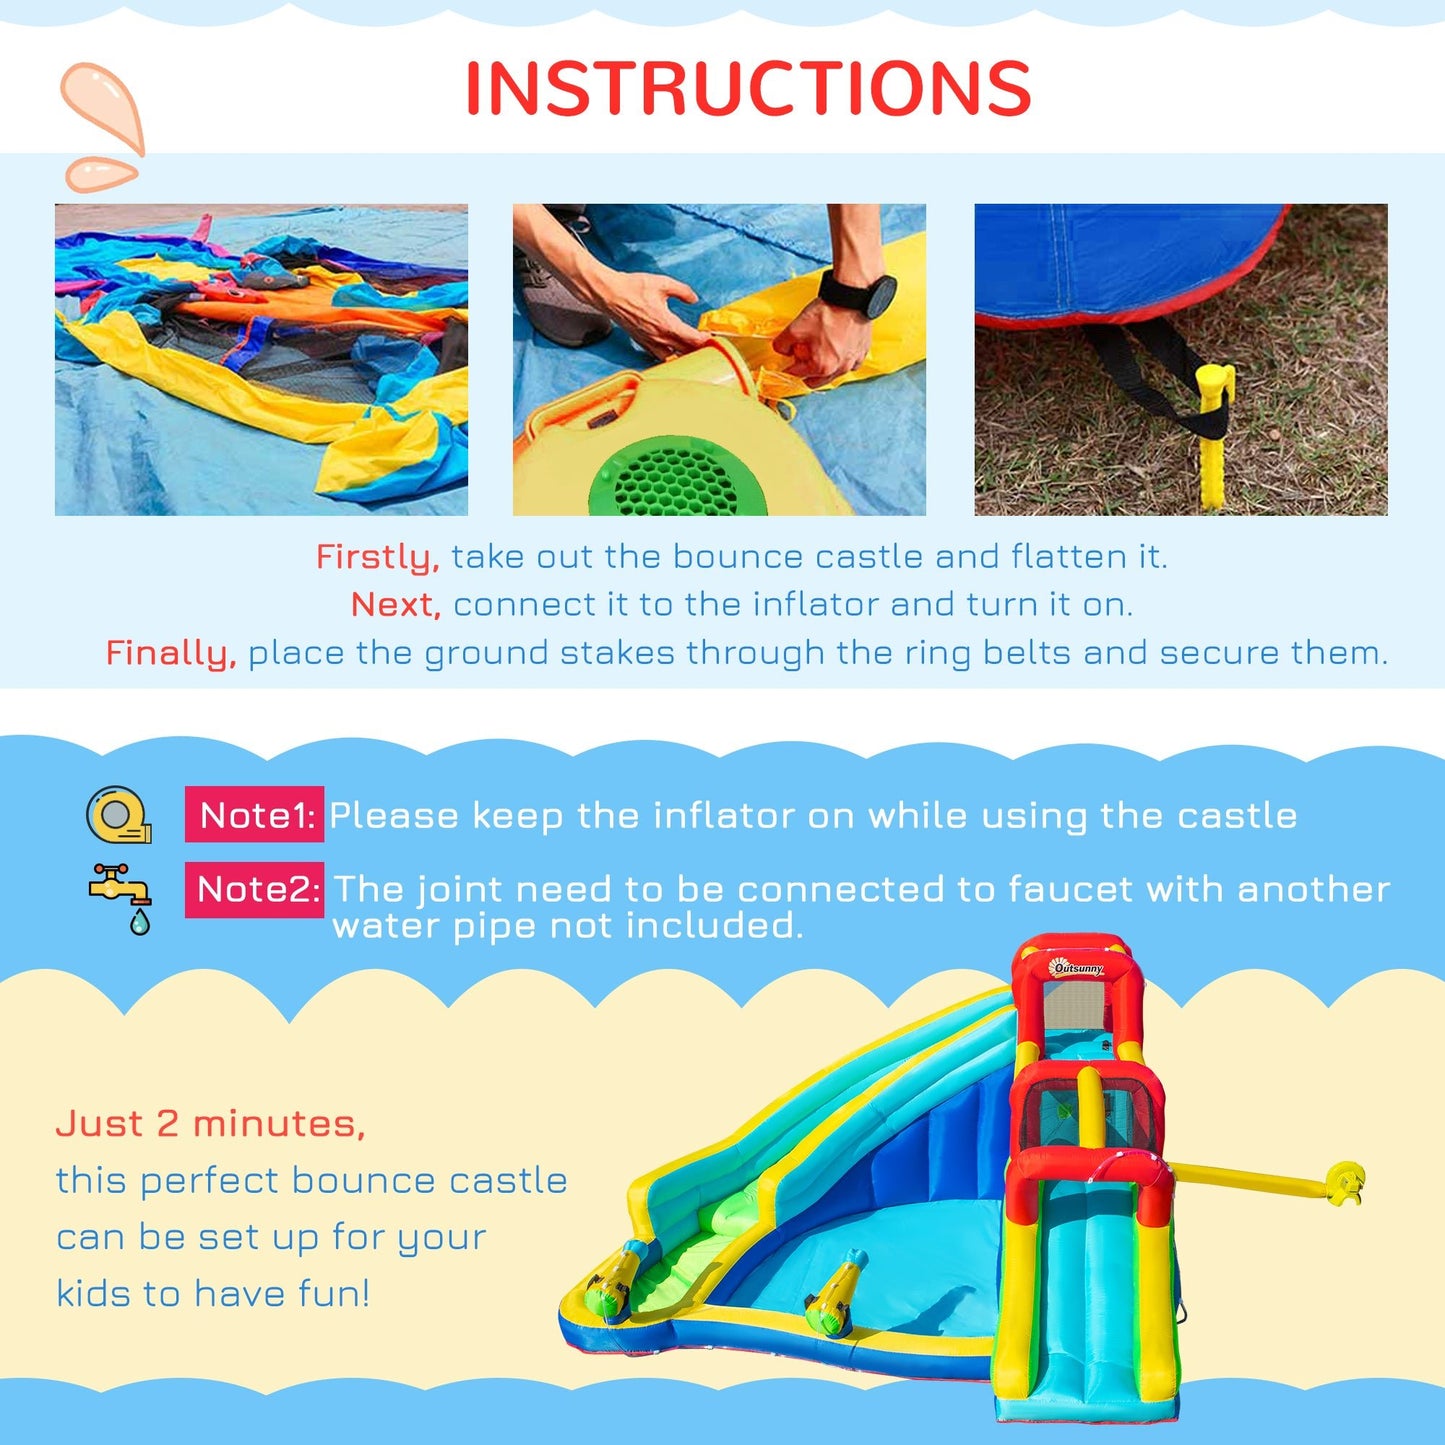 Miscellaneous-5-in-1 Water Slide Kids Inflatable Bounce House Water Park Jumping Castle Includes Trampoline Slide Water Pool without Air Blower - Outdoor Style Company